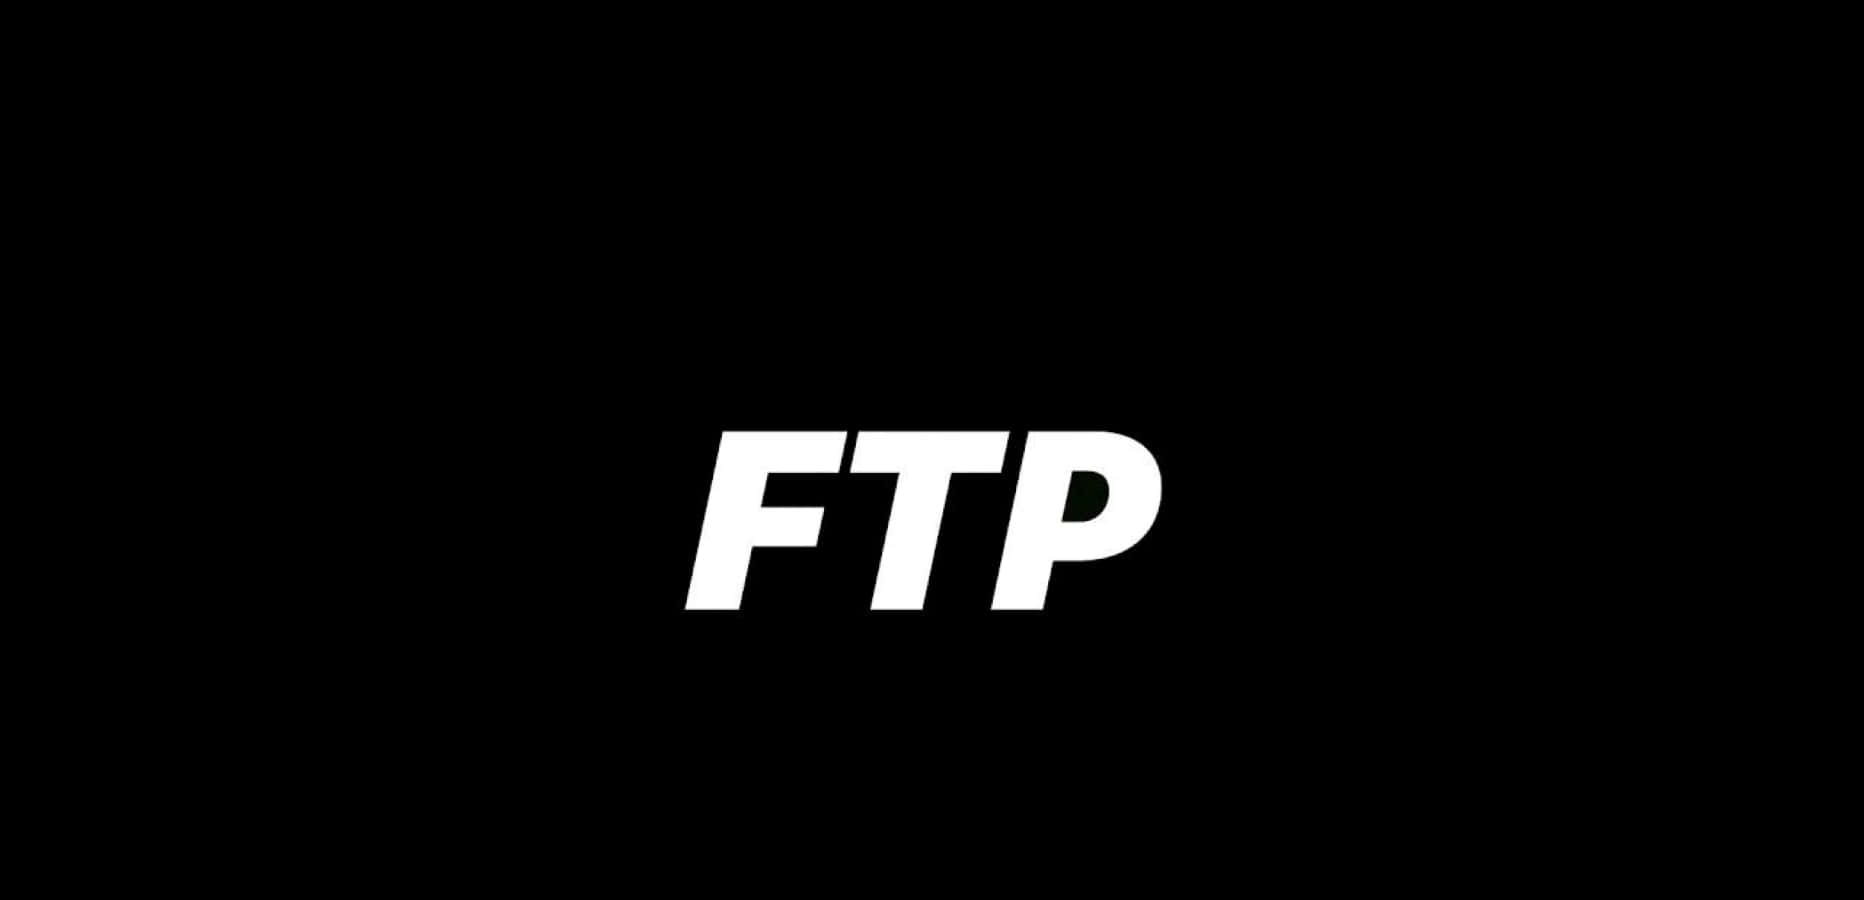 FTP Server Connection on a Computer Screen Wallpaper